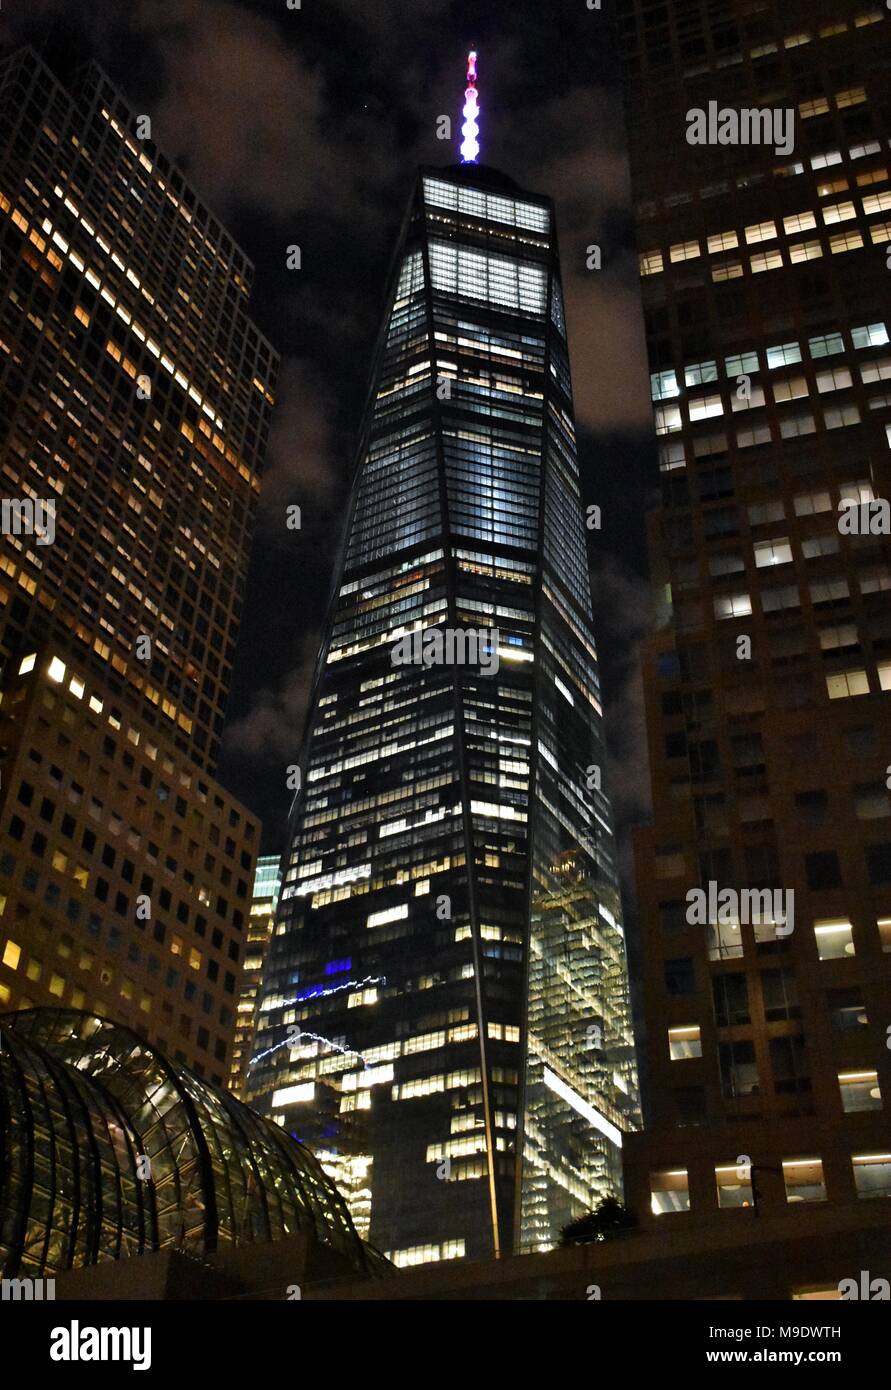 The Freedom Tower (One World Trade Center) at Ground Zero in downtown Manhattan at night. Stock Photo